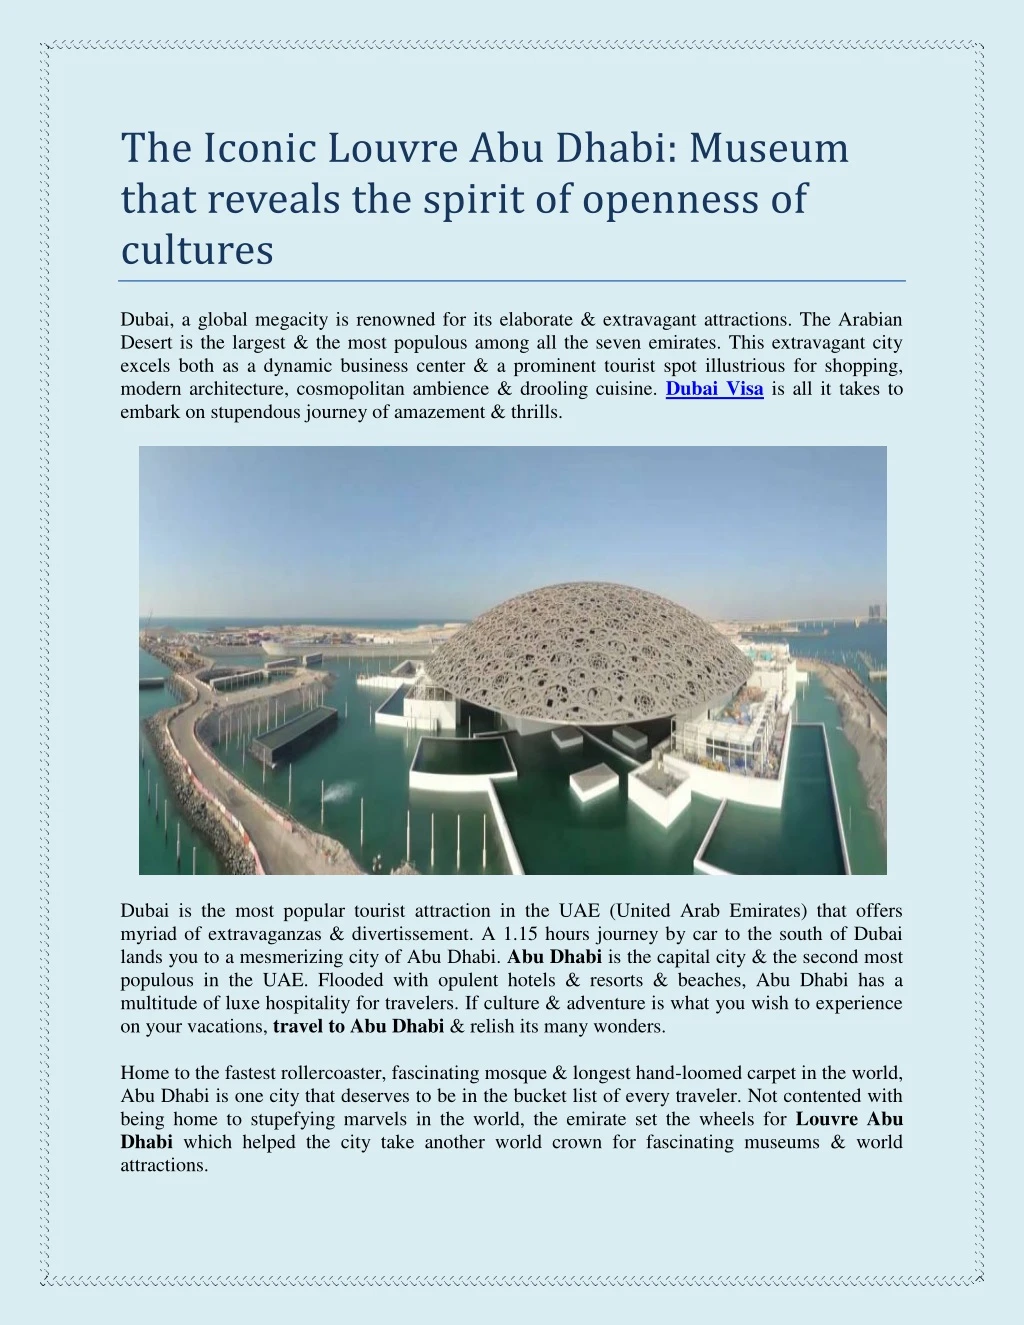 the iconic louvre abu dhabi museum that reveals